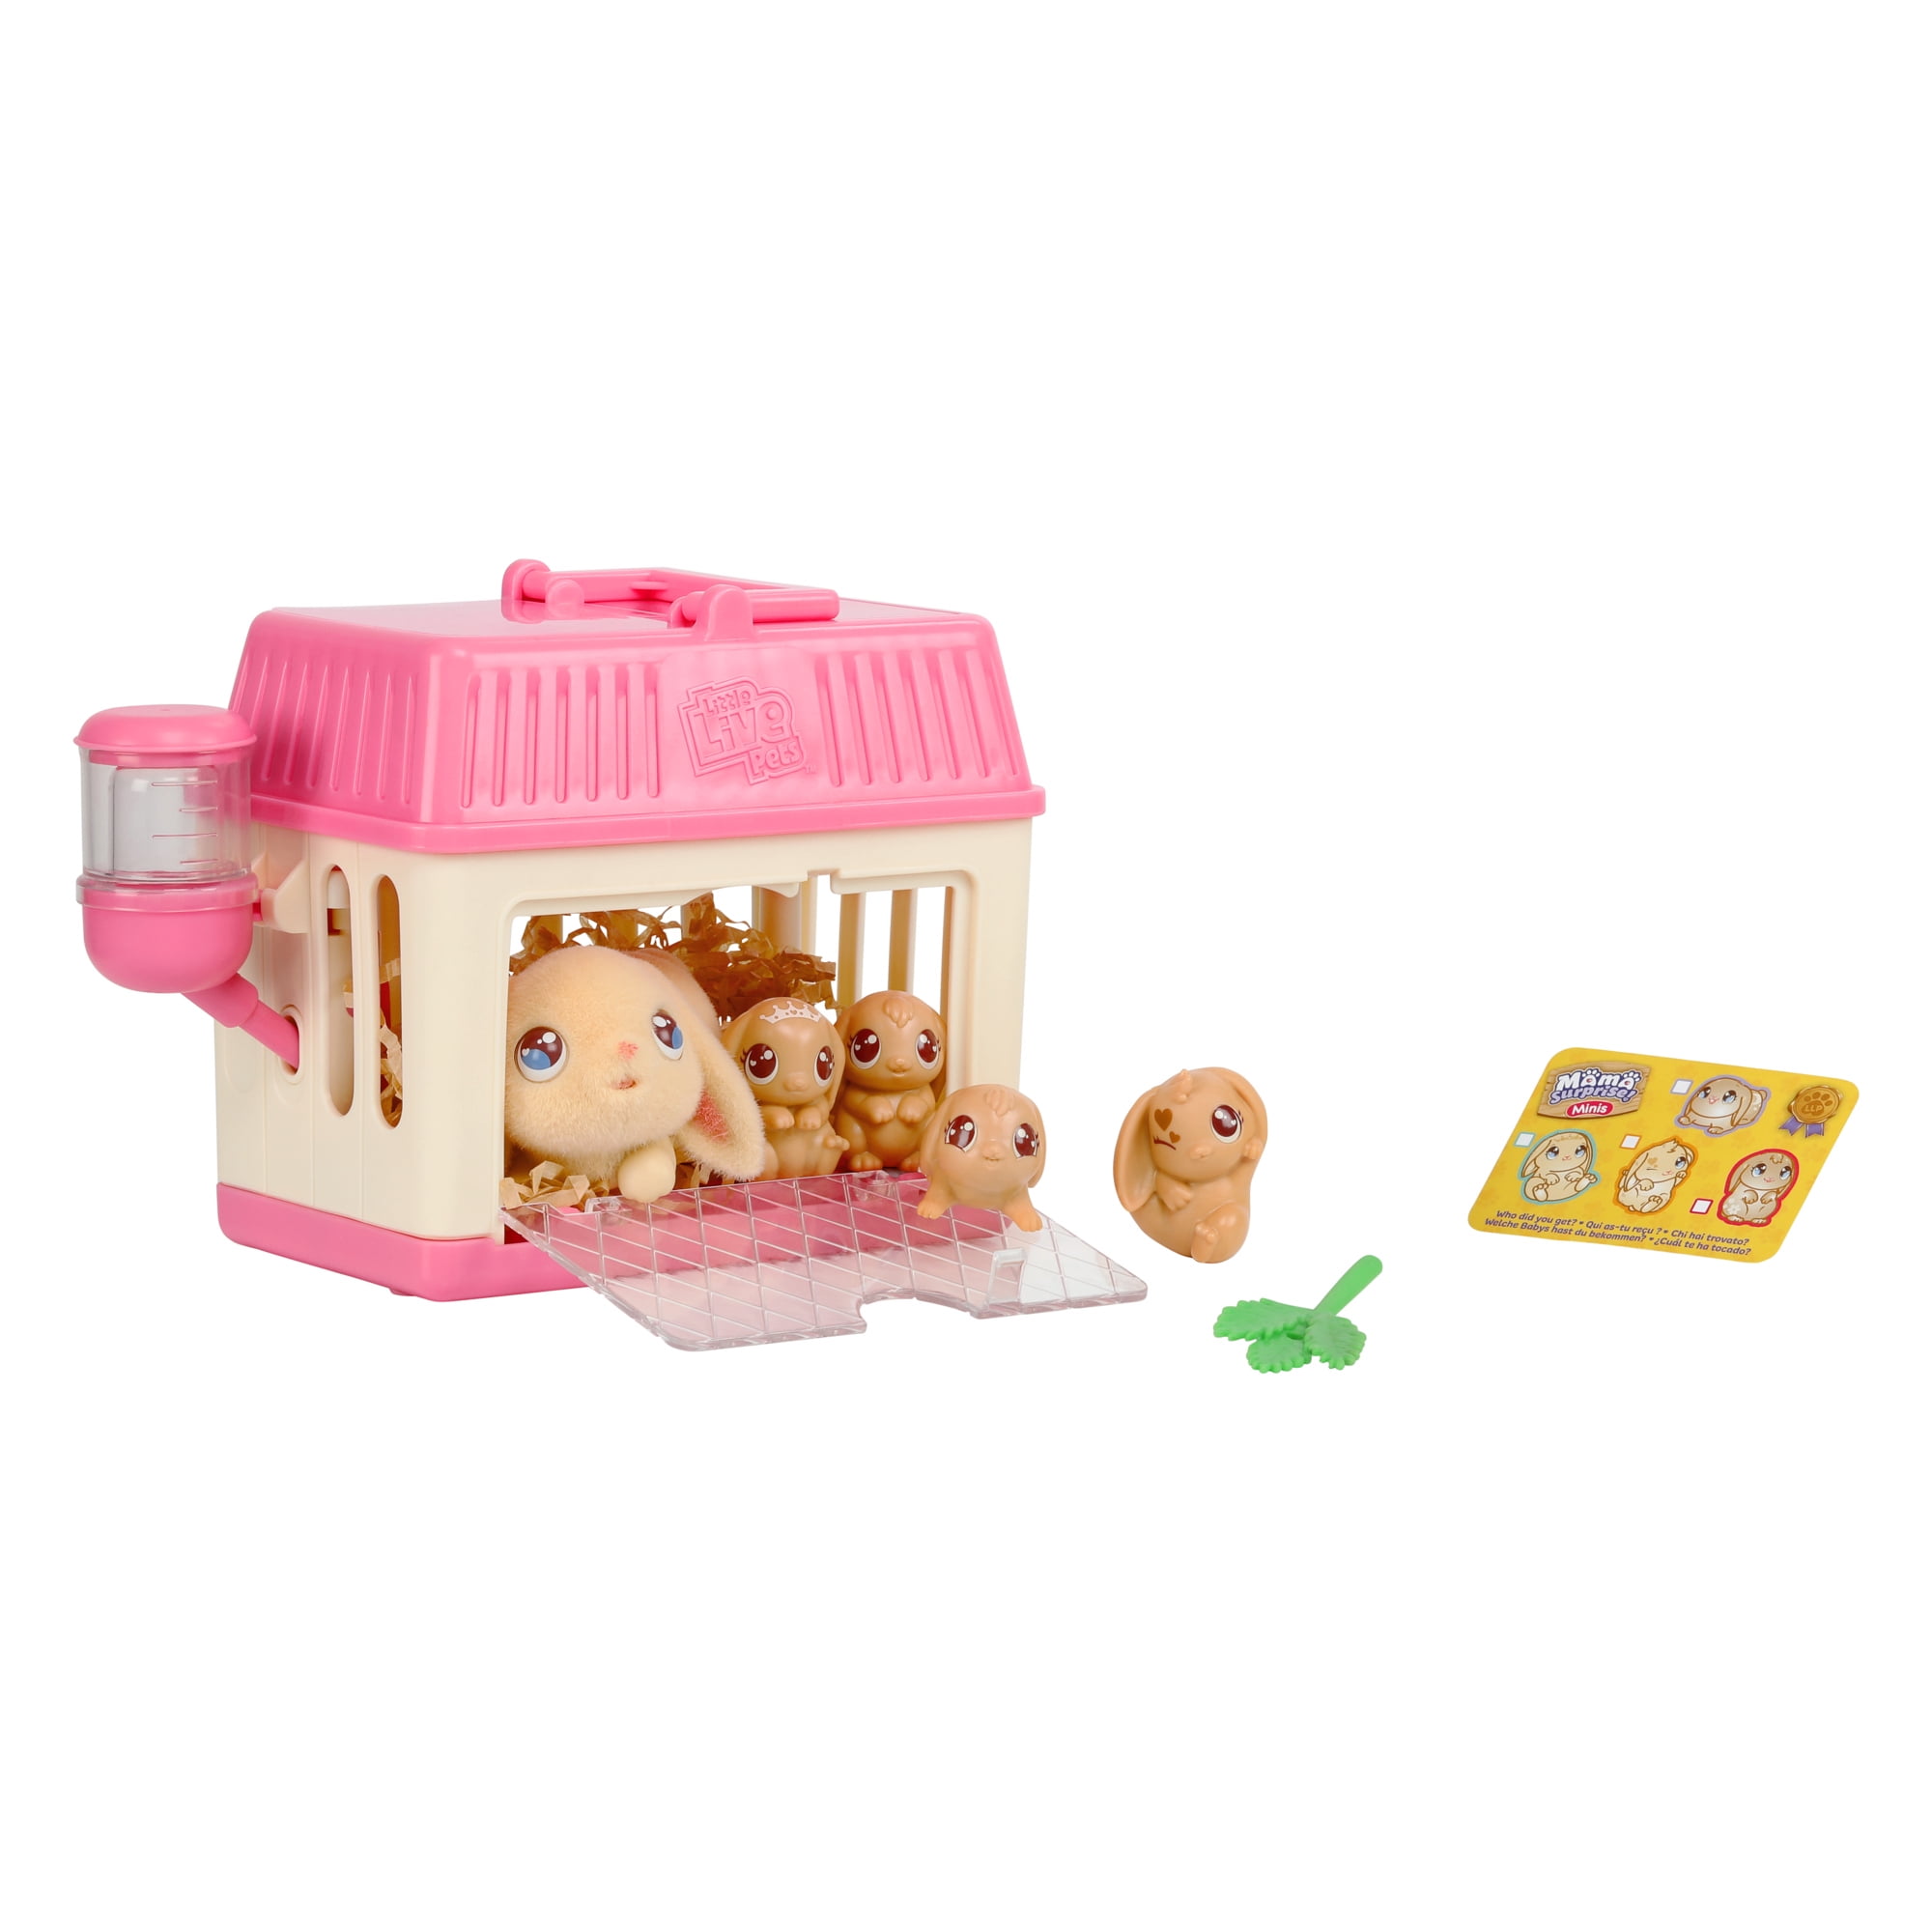 Little Live Pets Mama Surprise Lil' Bunny Minis Playset, Ages 5+